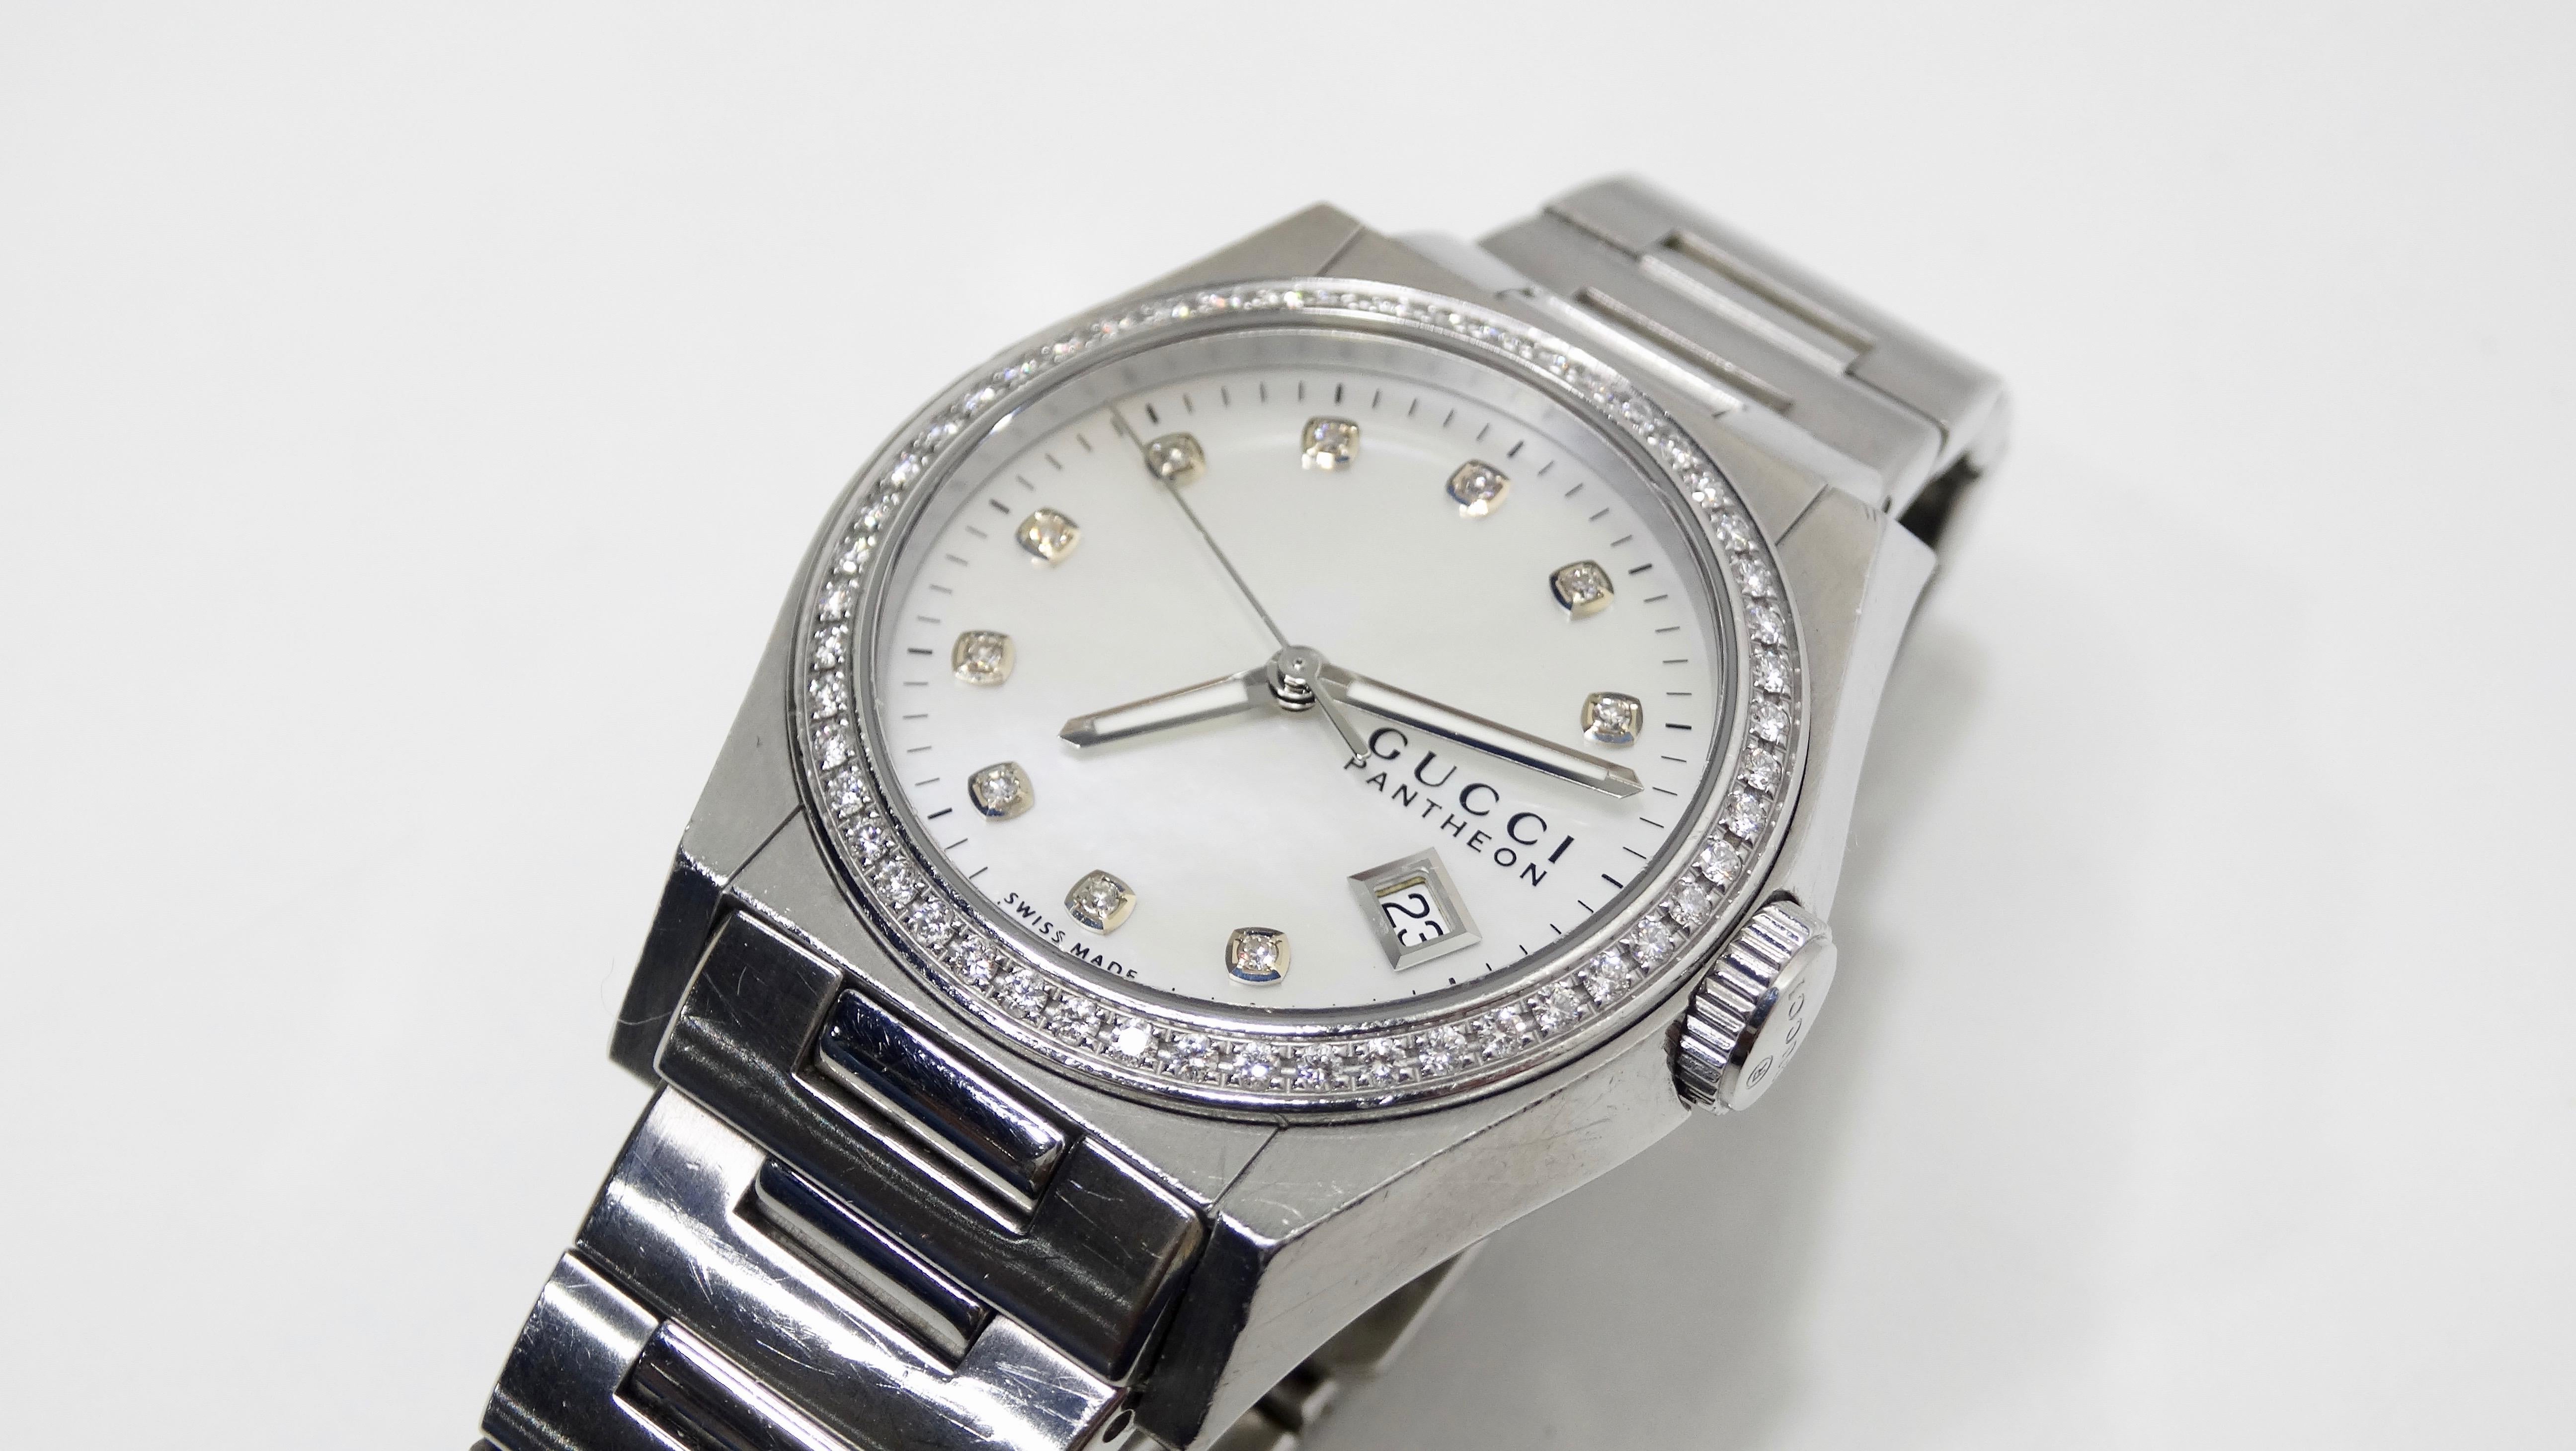 Give yourself some Gucci! Circa 21st Century, this timeless Swiss made Gucci 36mm wrist watch is crafted from Stainless Steel and features a Bezel set with 50 Diamonds (0.71ct), White Mother of Pearl dial with 10 diamond hour markers, a scratch